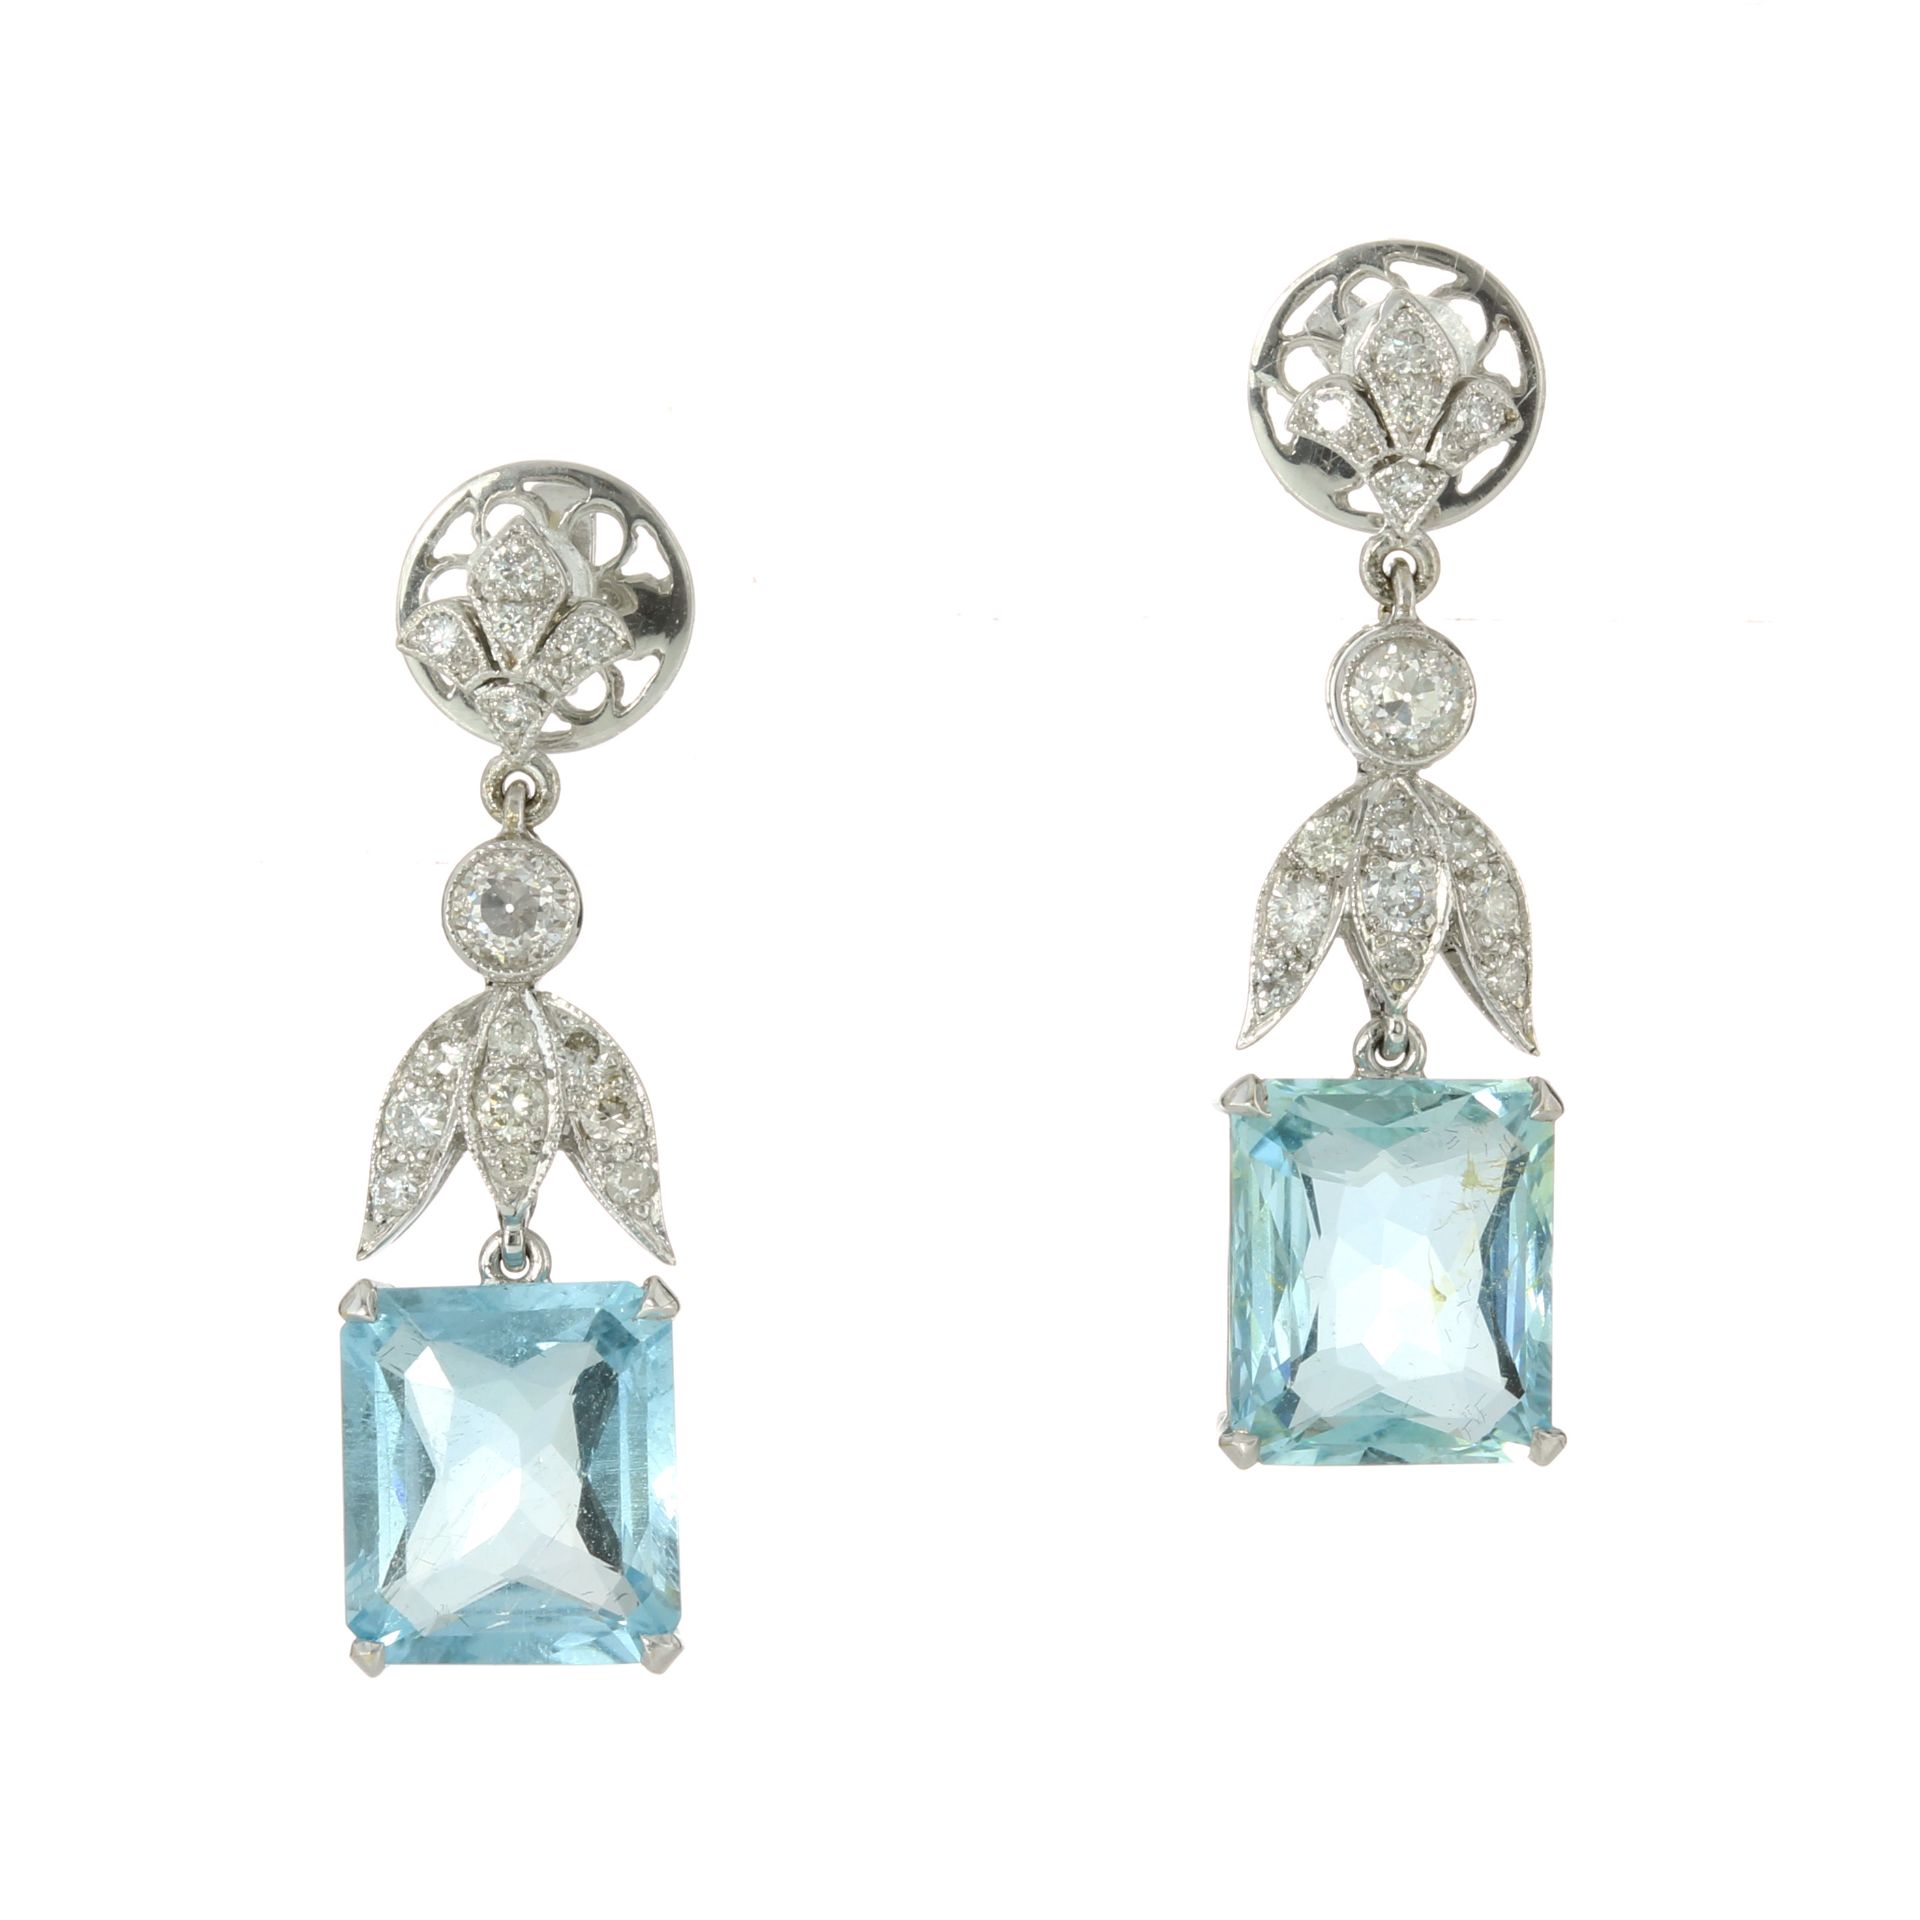 A PAIR OF AQUAMARINE AND DIAMOND EARRINGS each set with a radiant cut aquamarine suspended below a